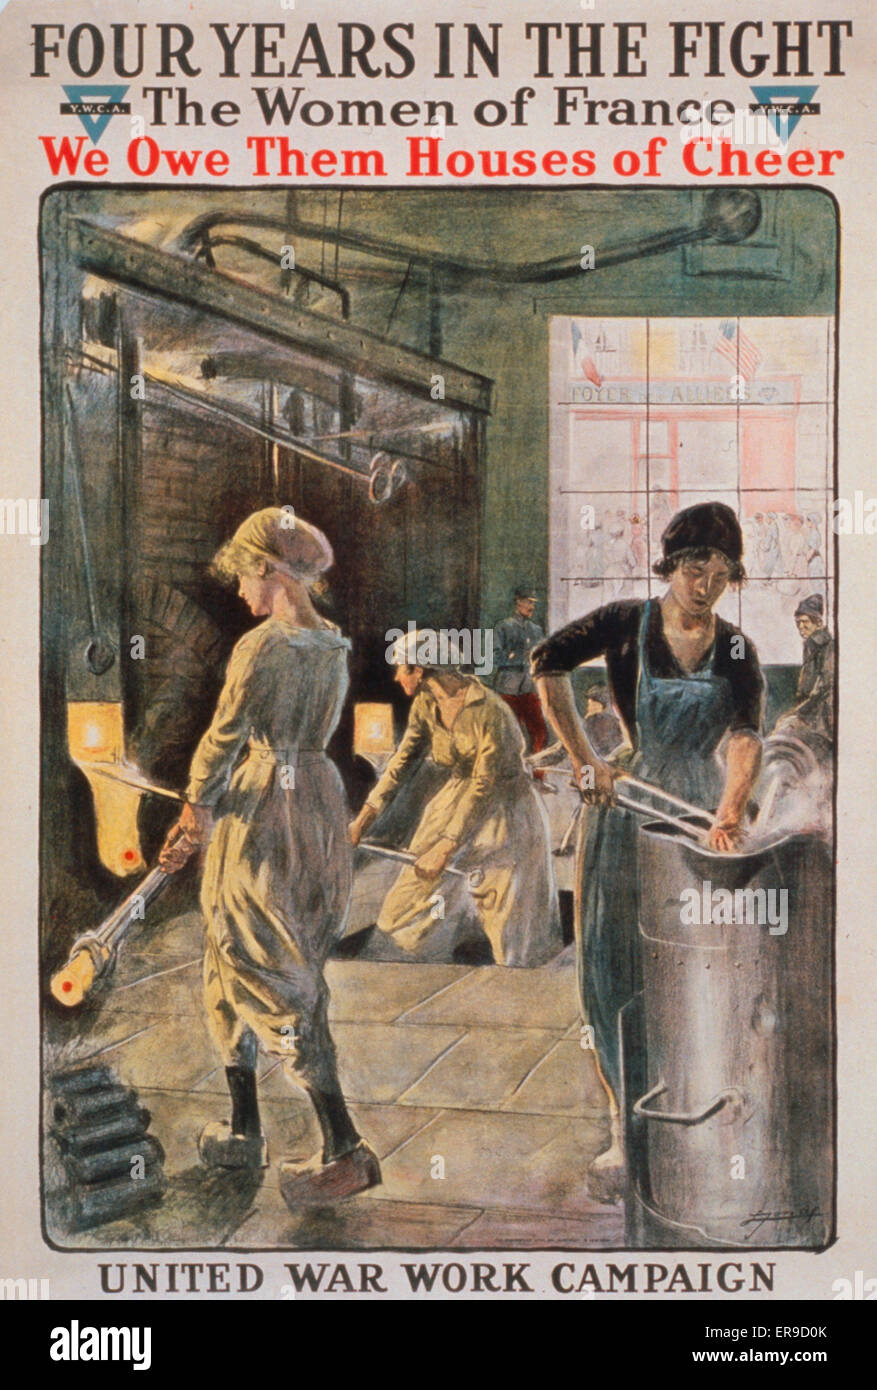 Four years in the fight. The women of France, we owe them houses of cheer. United War Work Campaign. YWC.A. Women working in a factory. Date 1918. Stock Photo